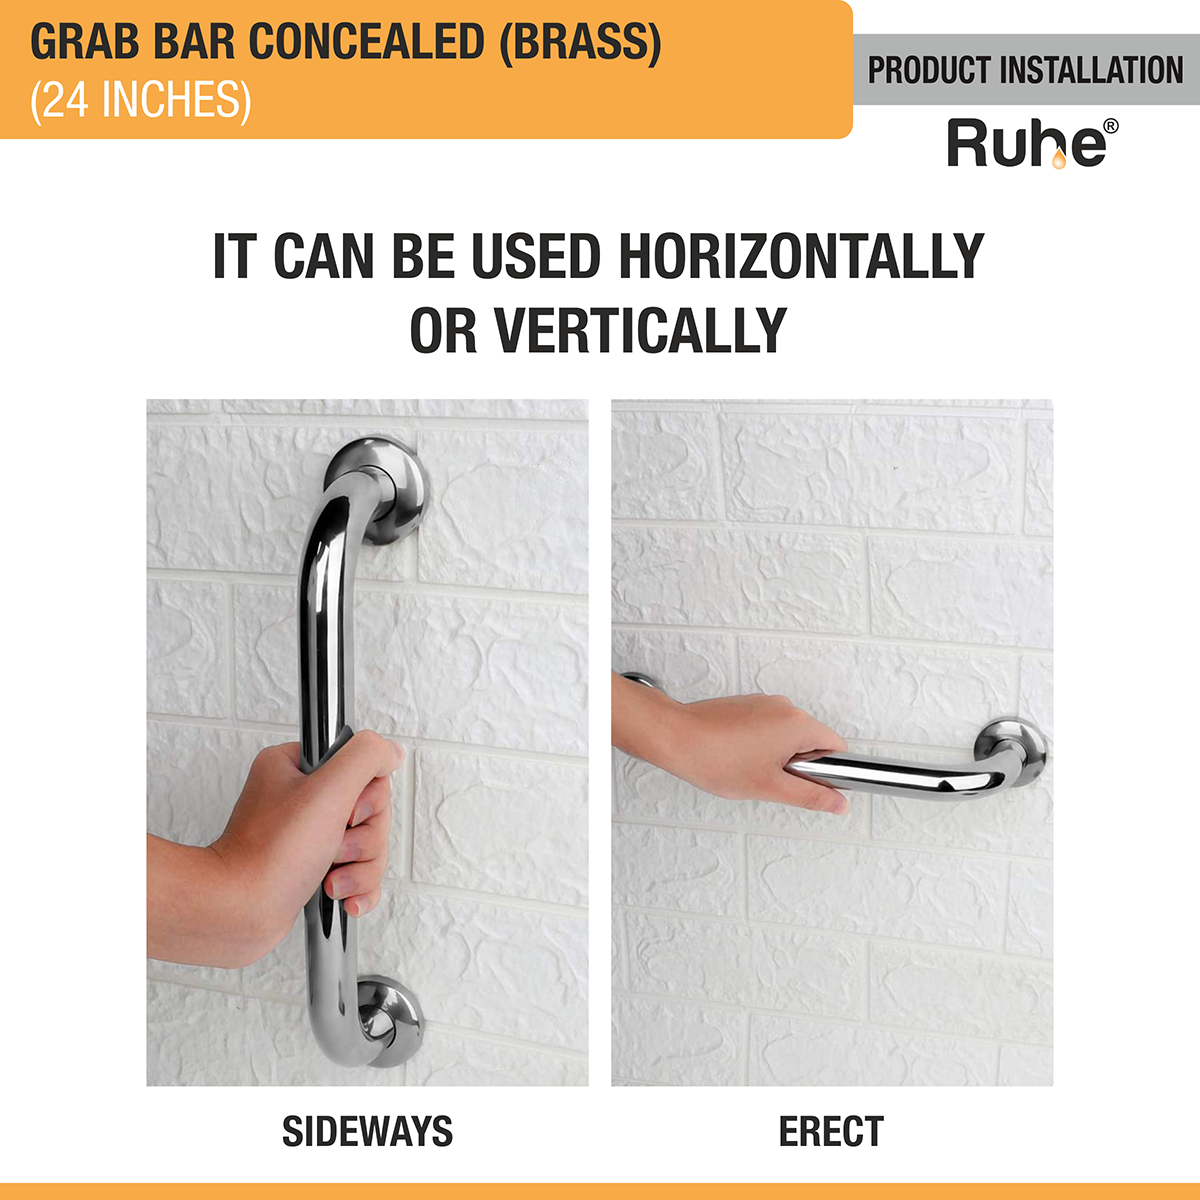 Brass Grab Bar Concealed (24 inches) with horizontally and vertically installation